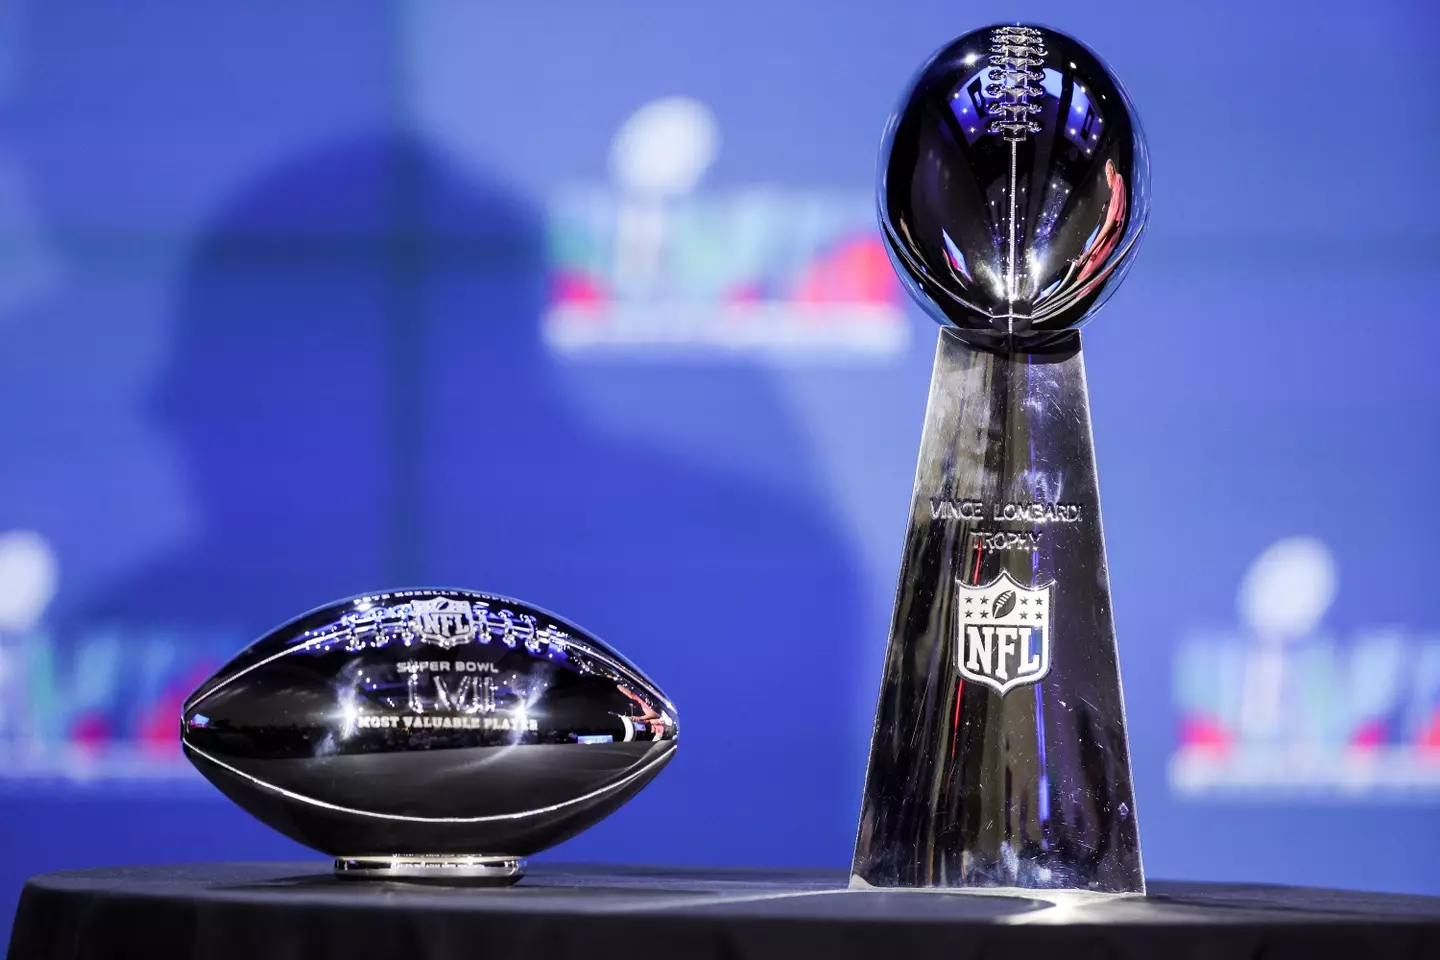 Who will take home the Super Bowl trophy this year?